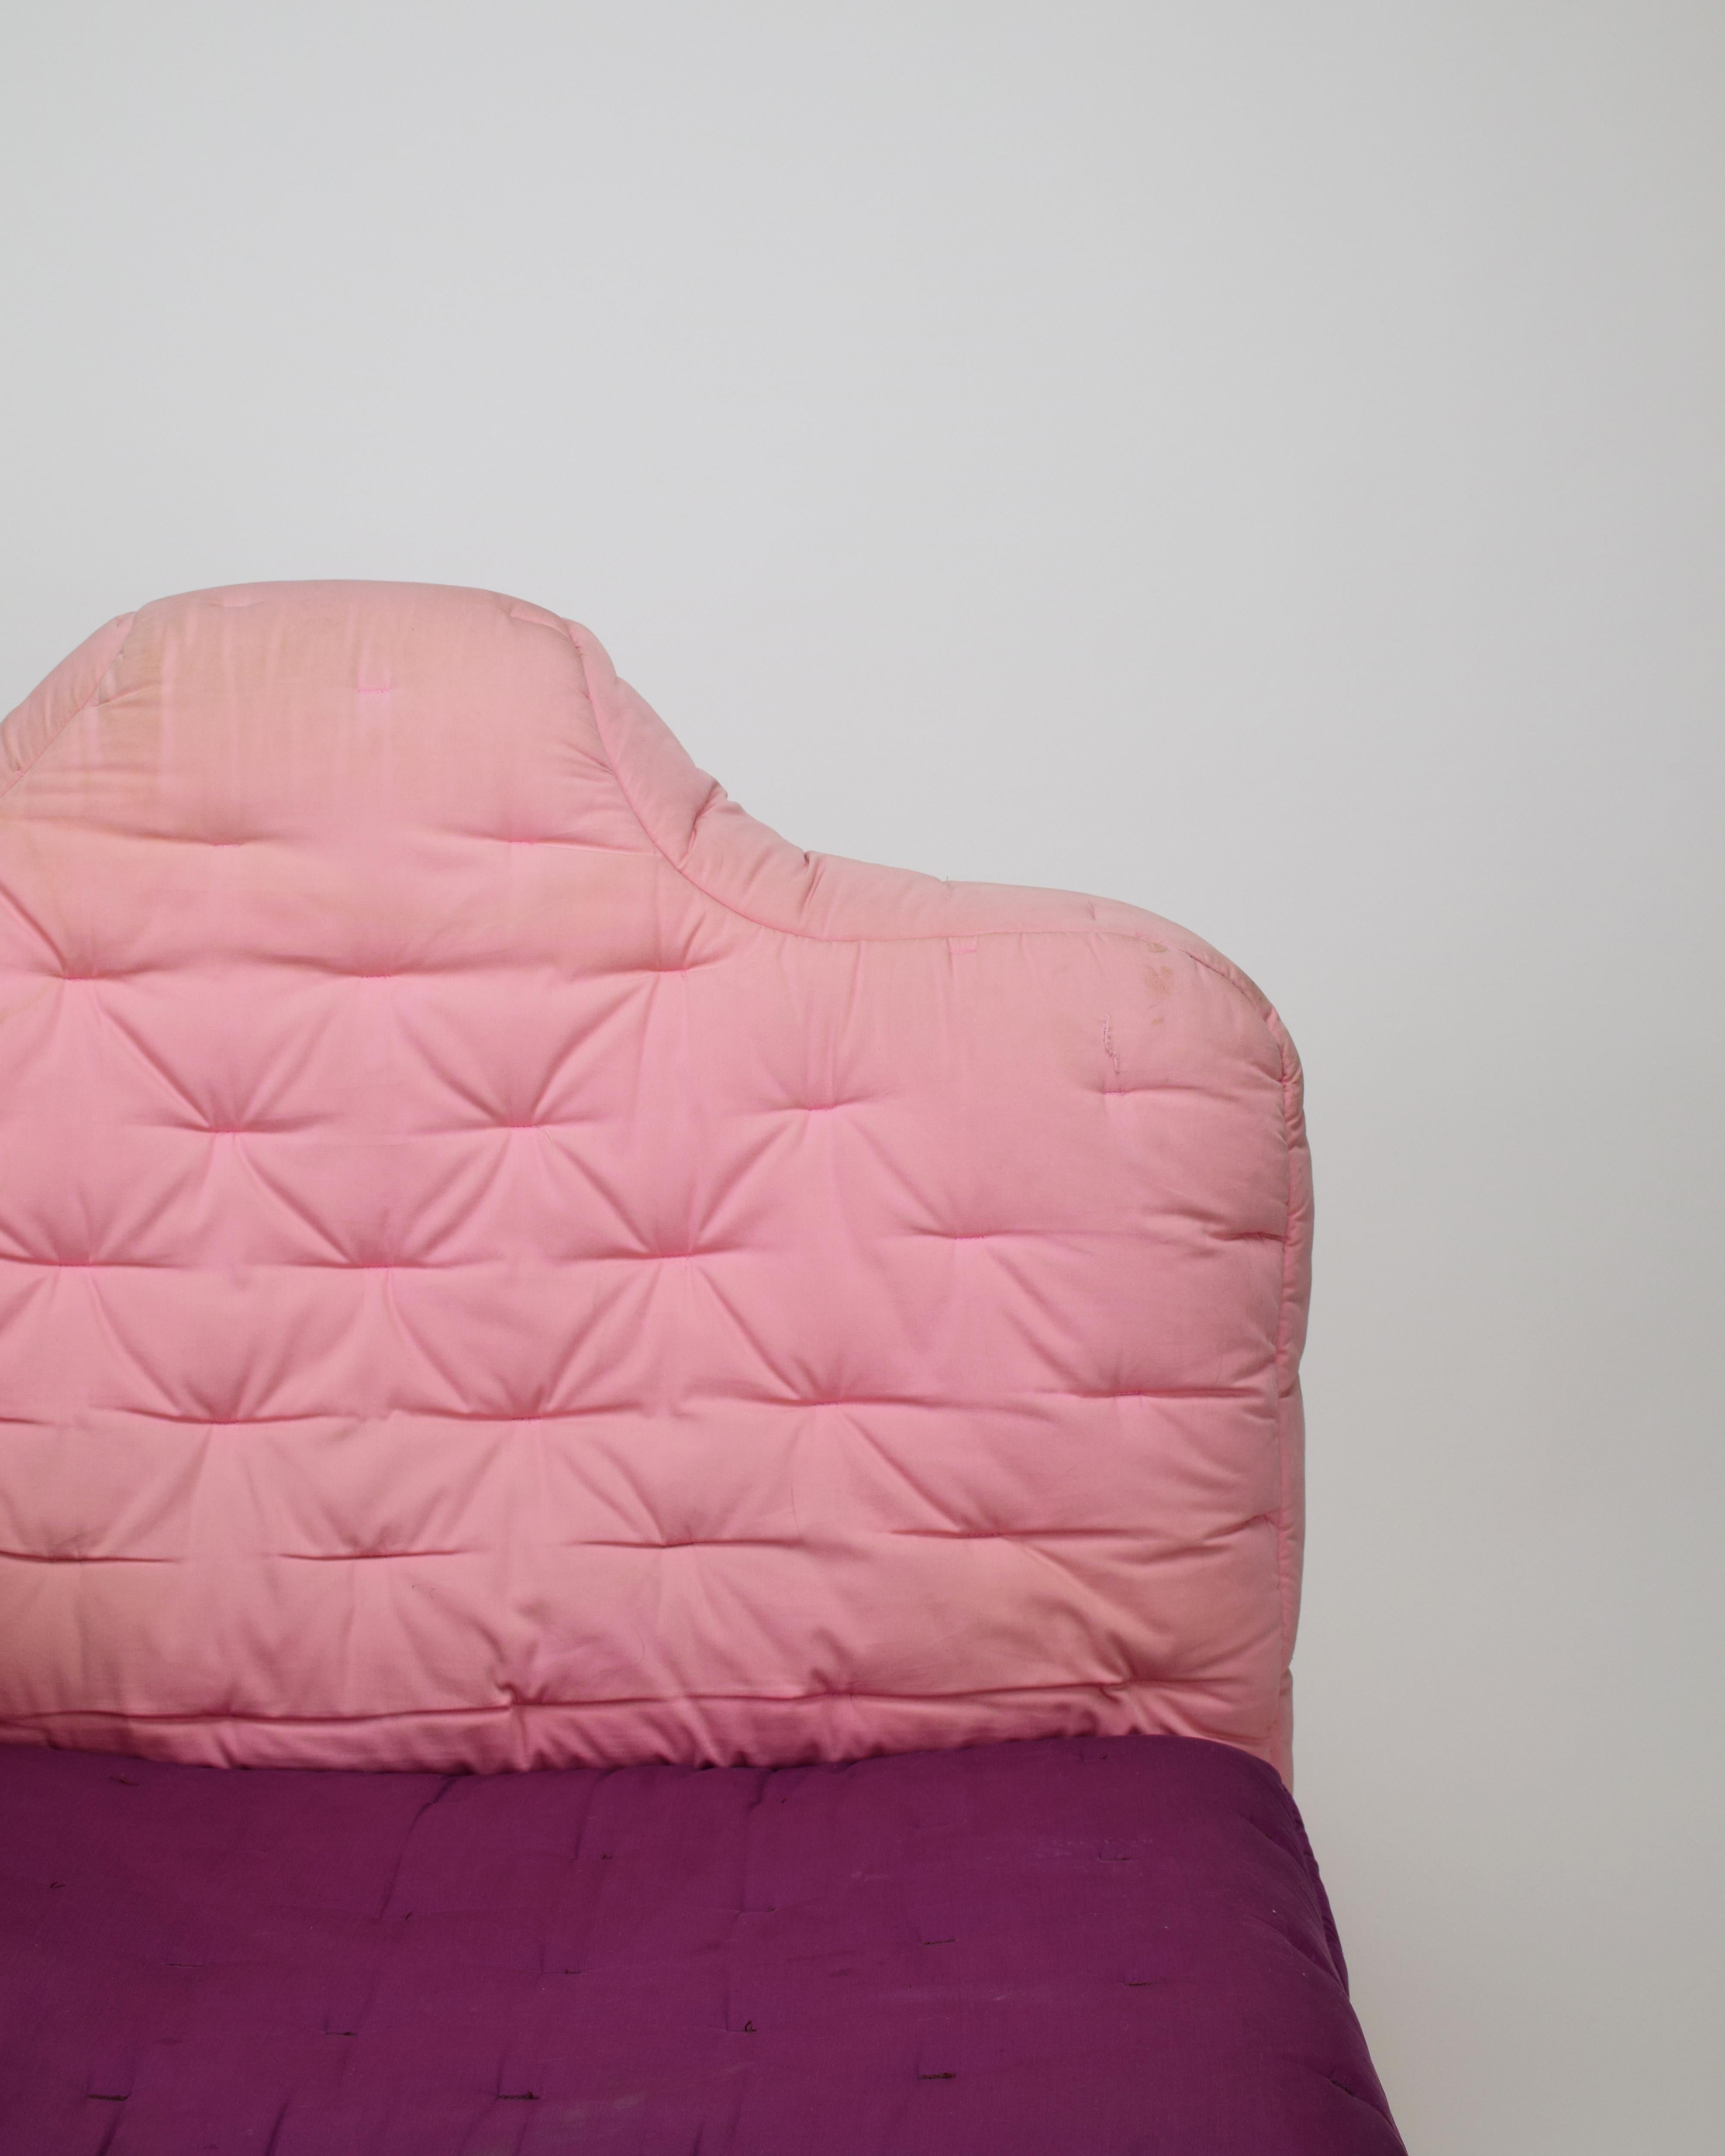 Gaetano Pesce, 'Cannaregio' Armchair, Cassina Italy 1987, Large Pink and Purple For Sale 4